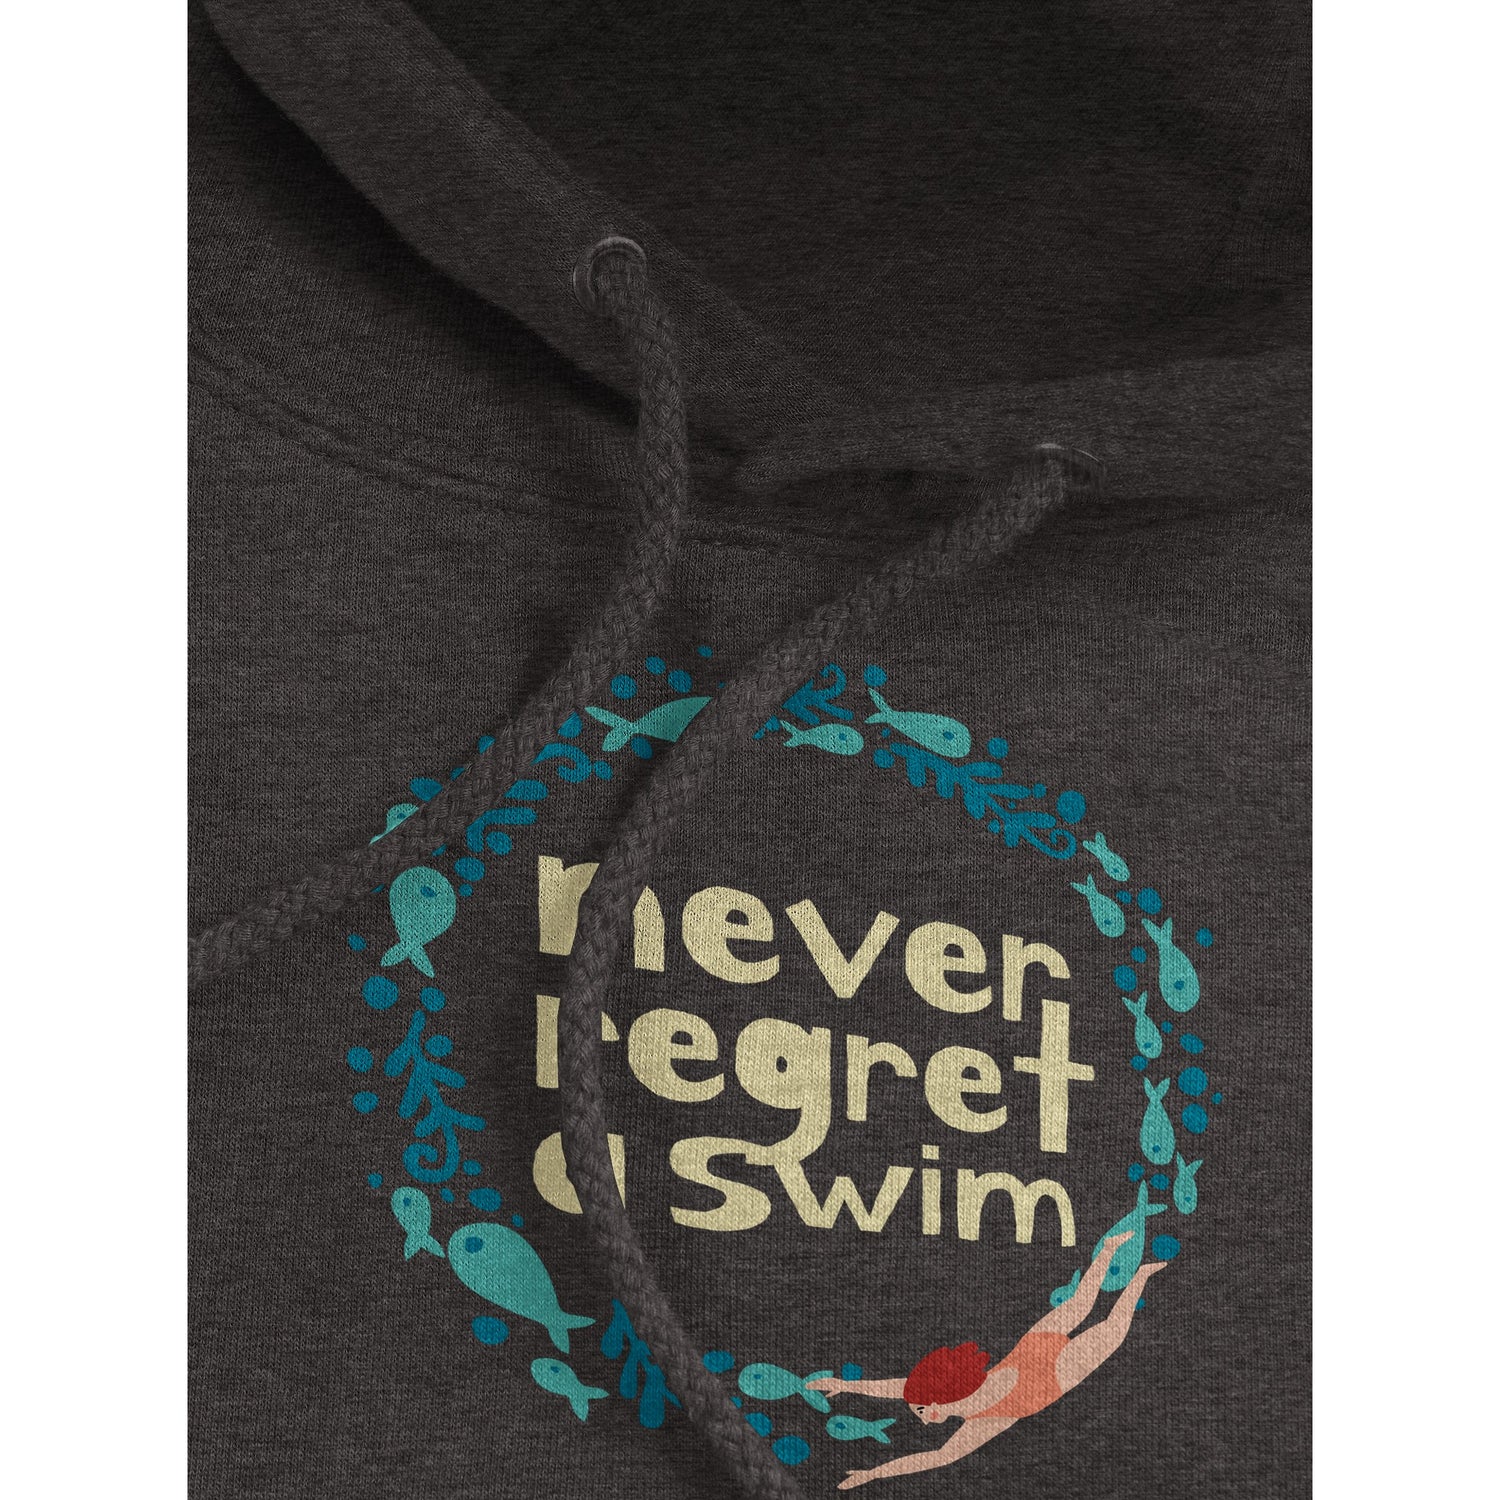 Dark grey hoodie with "never regret a swim" print on its front